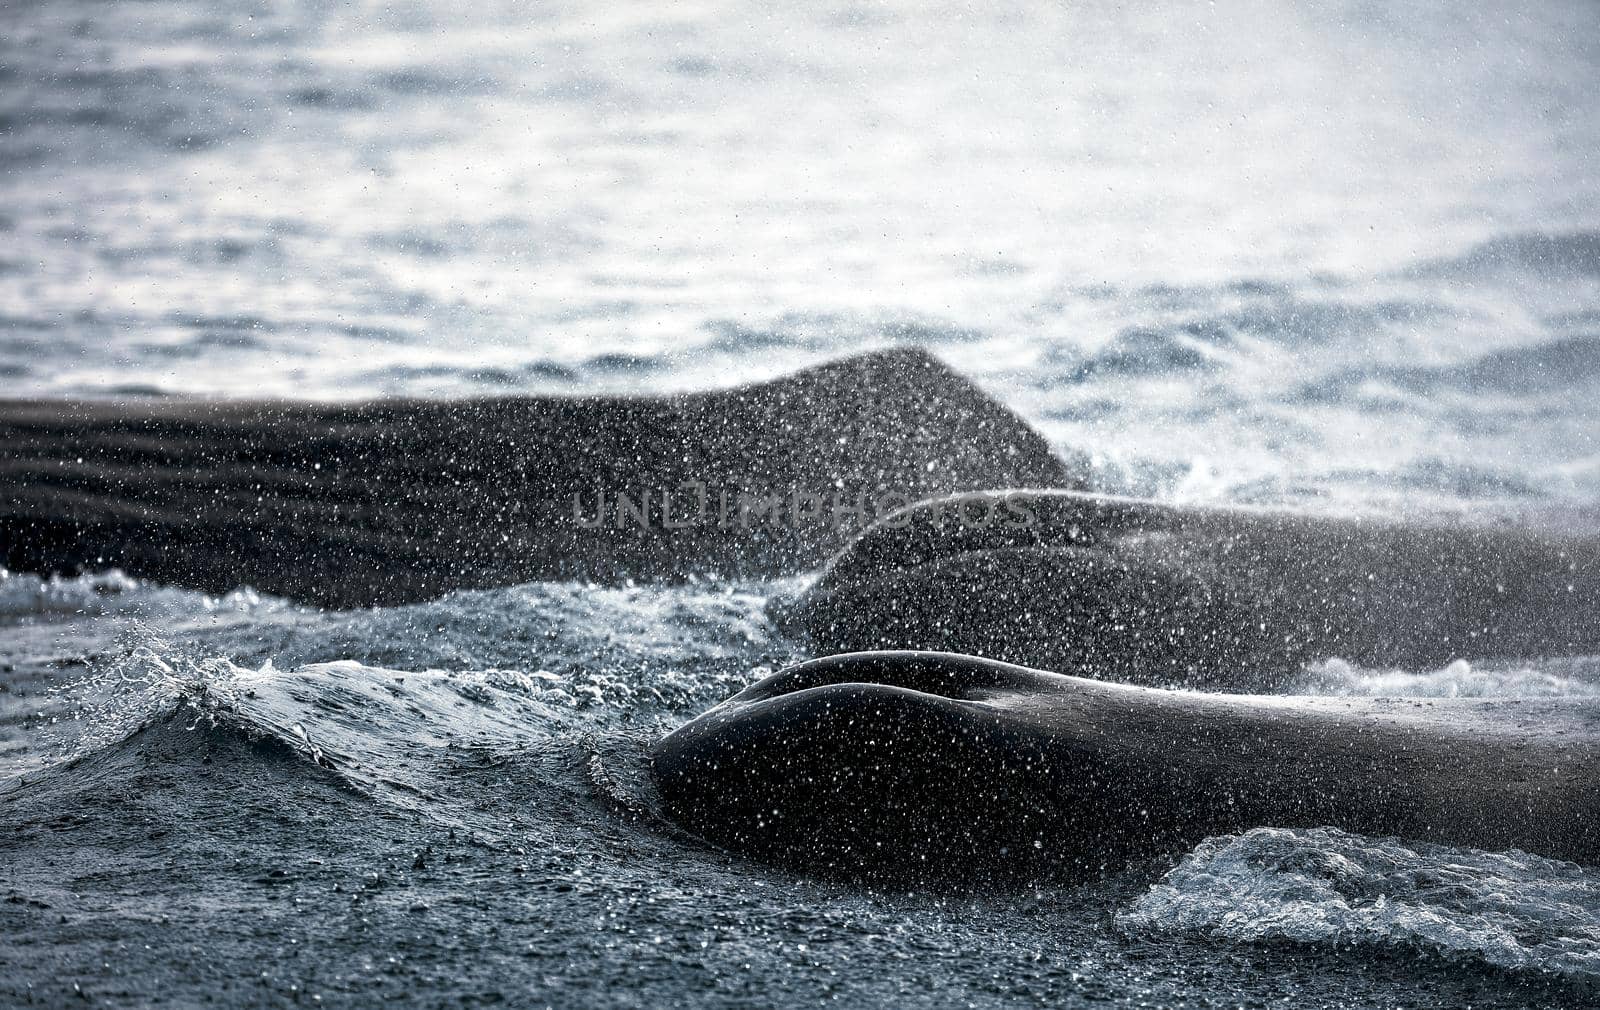 Whale watching. Group of sperm whales breathes air. Splashes and chalks of whales above the sea. Sea Safari (Whale safari). Physéter macrocéphalus by EvgeniyQW